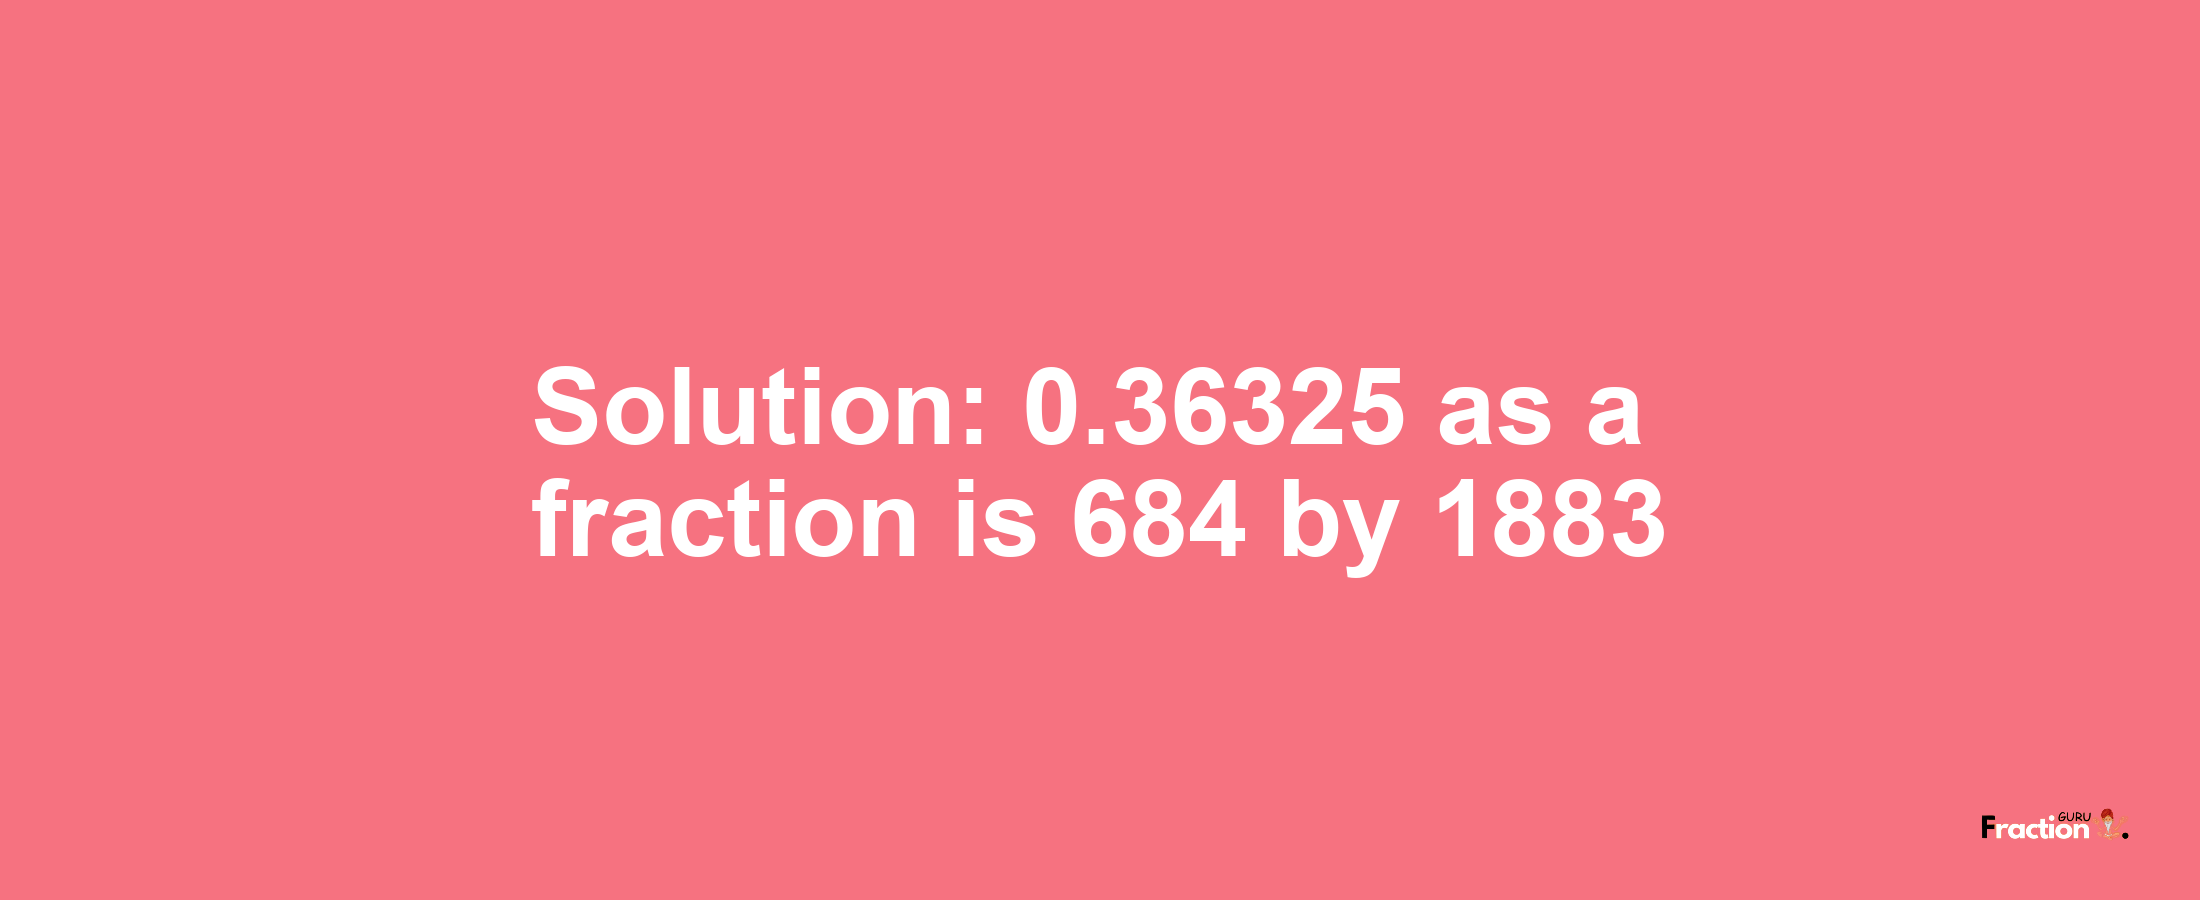 Solution:0.36325 as a fraction is 684/1883